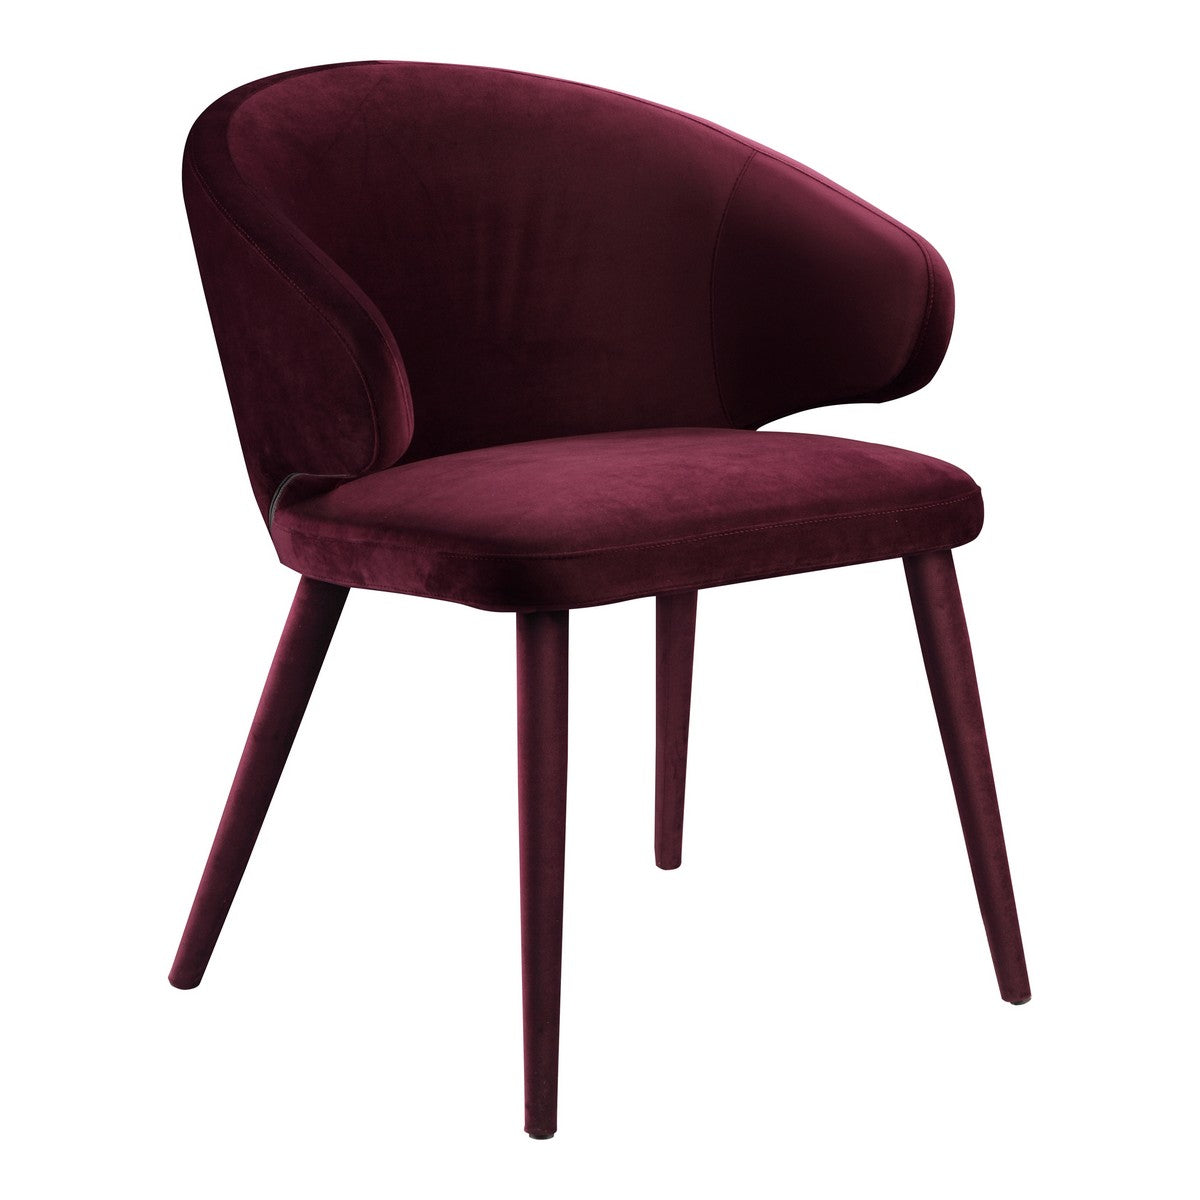 Moe's Home Collection Stewart Dining Chair Purple - EH-1104-10